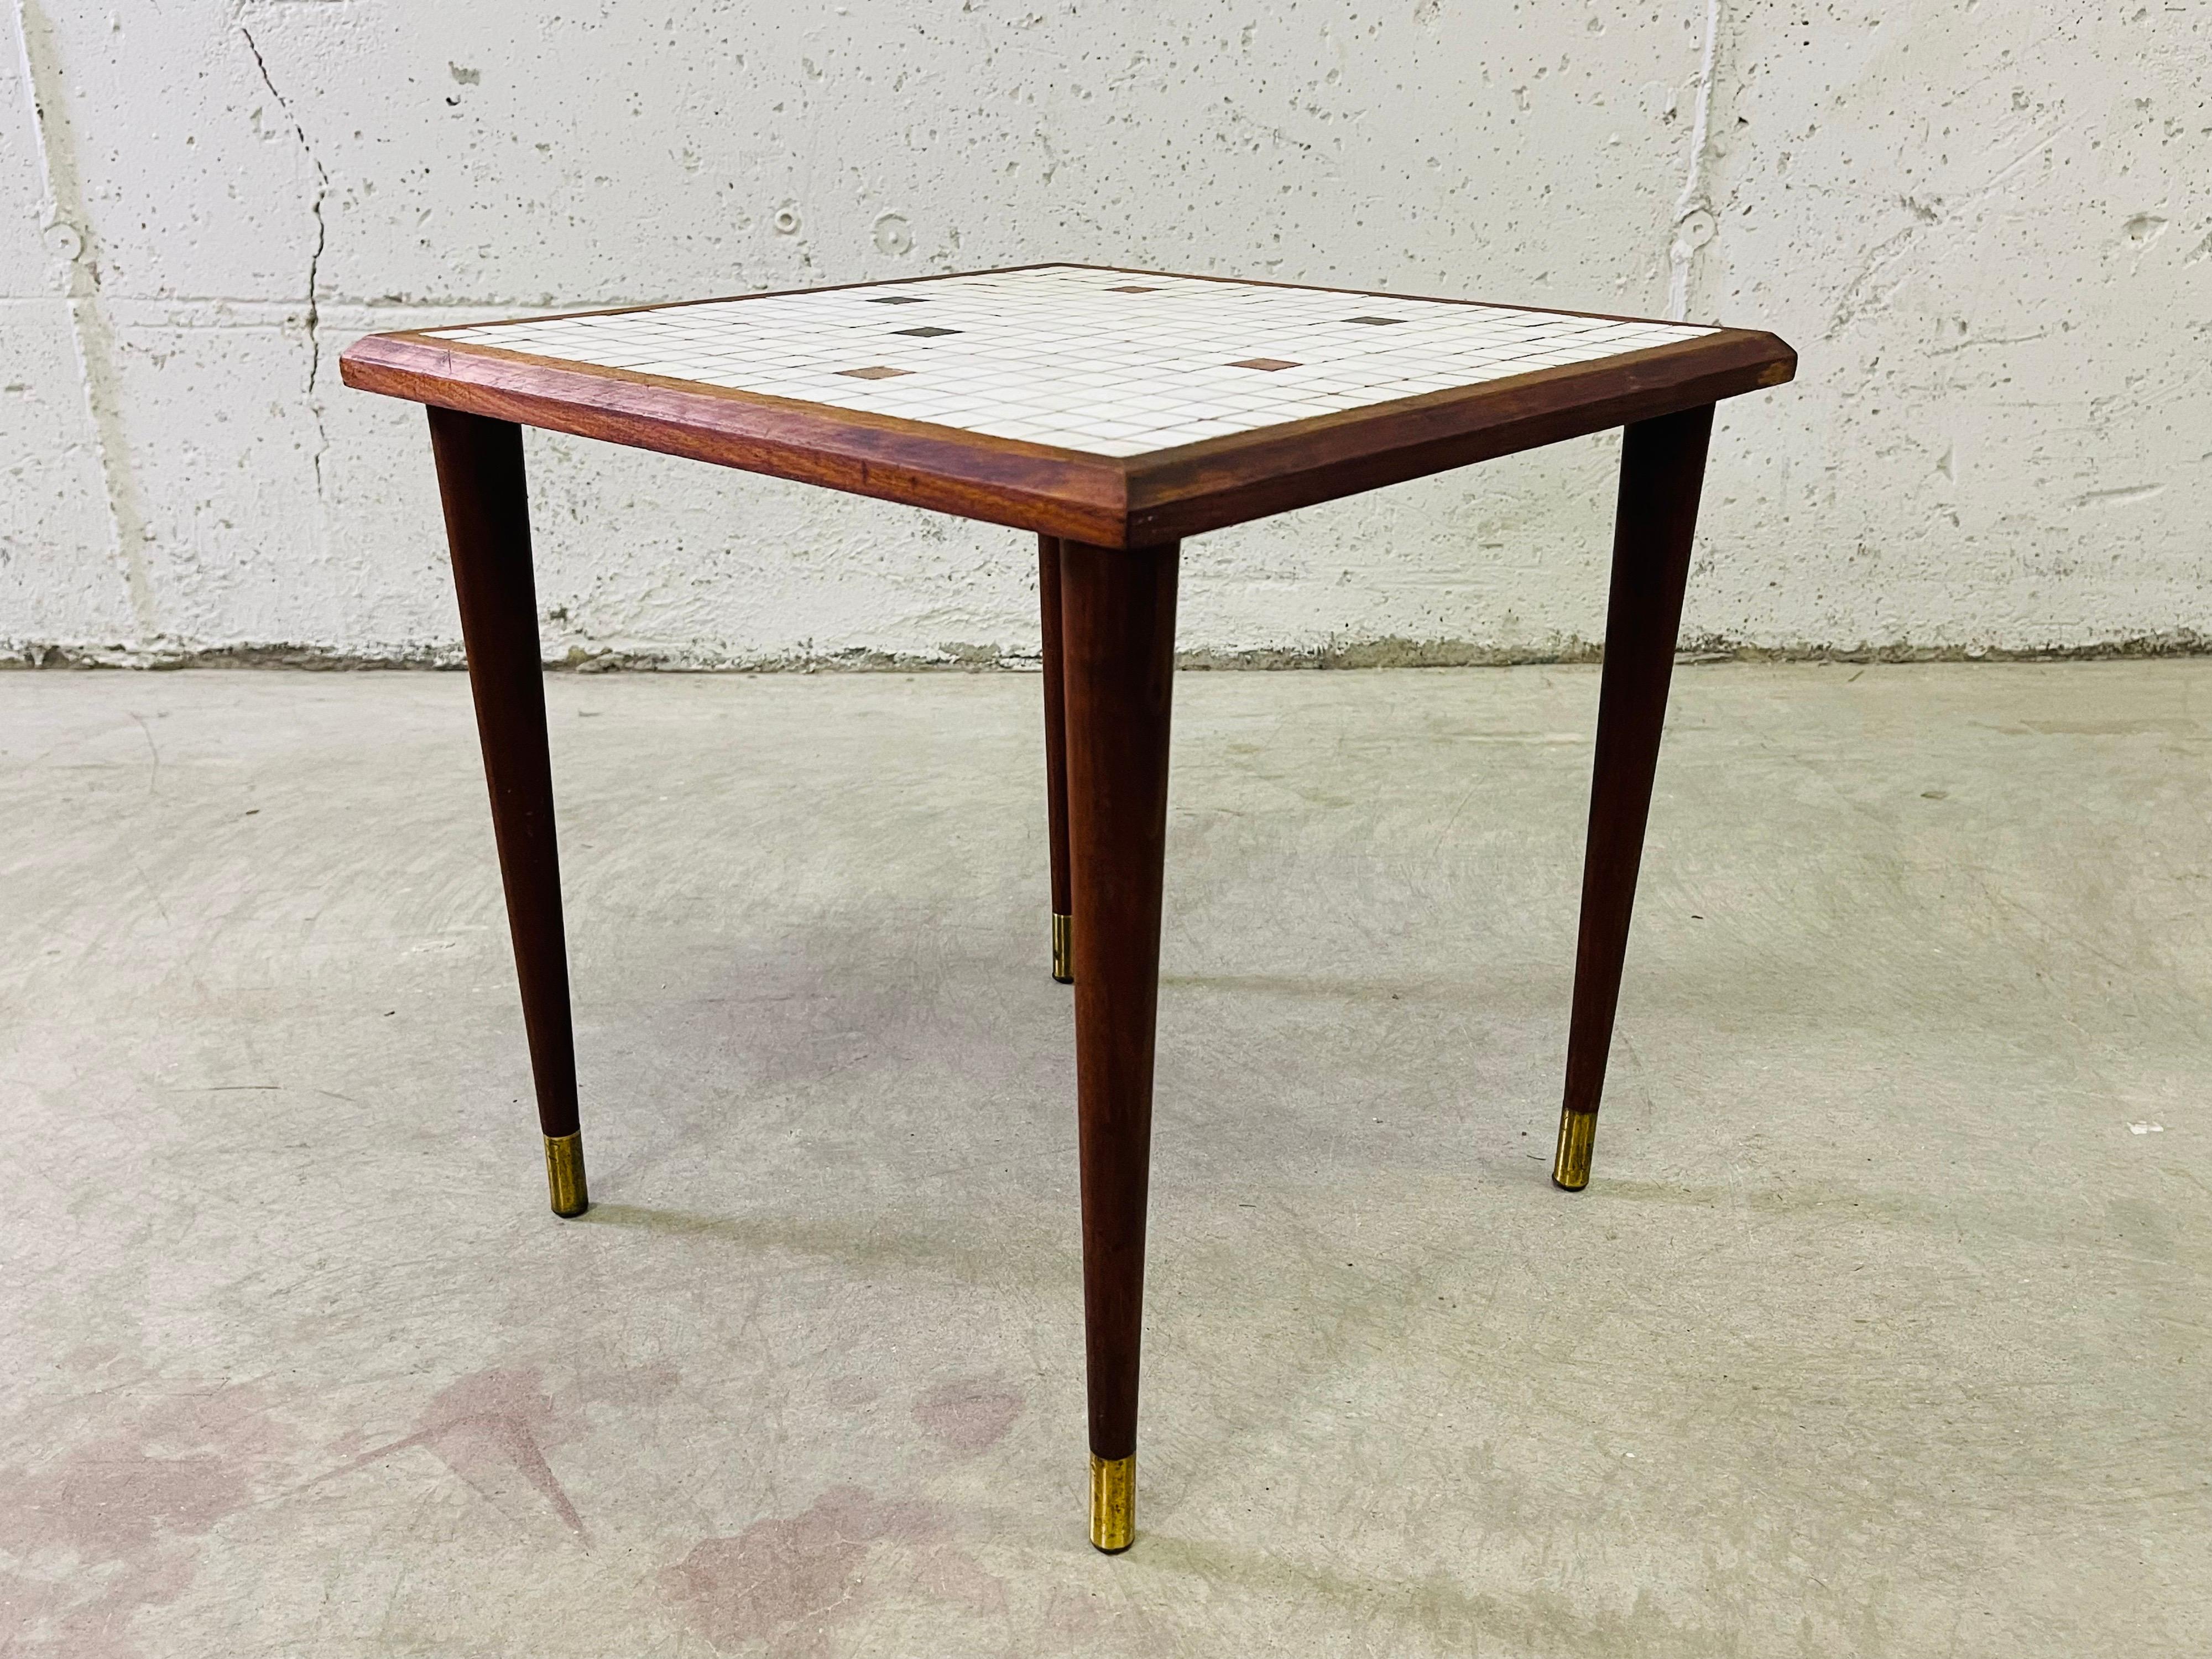 Vintage 1960s small square tile top table side table with round legs. The tile is white with gold accented tiles. The legs have brass accents. No marks.